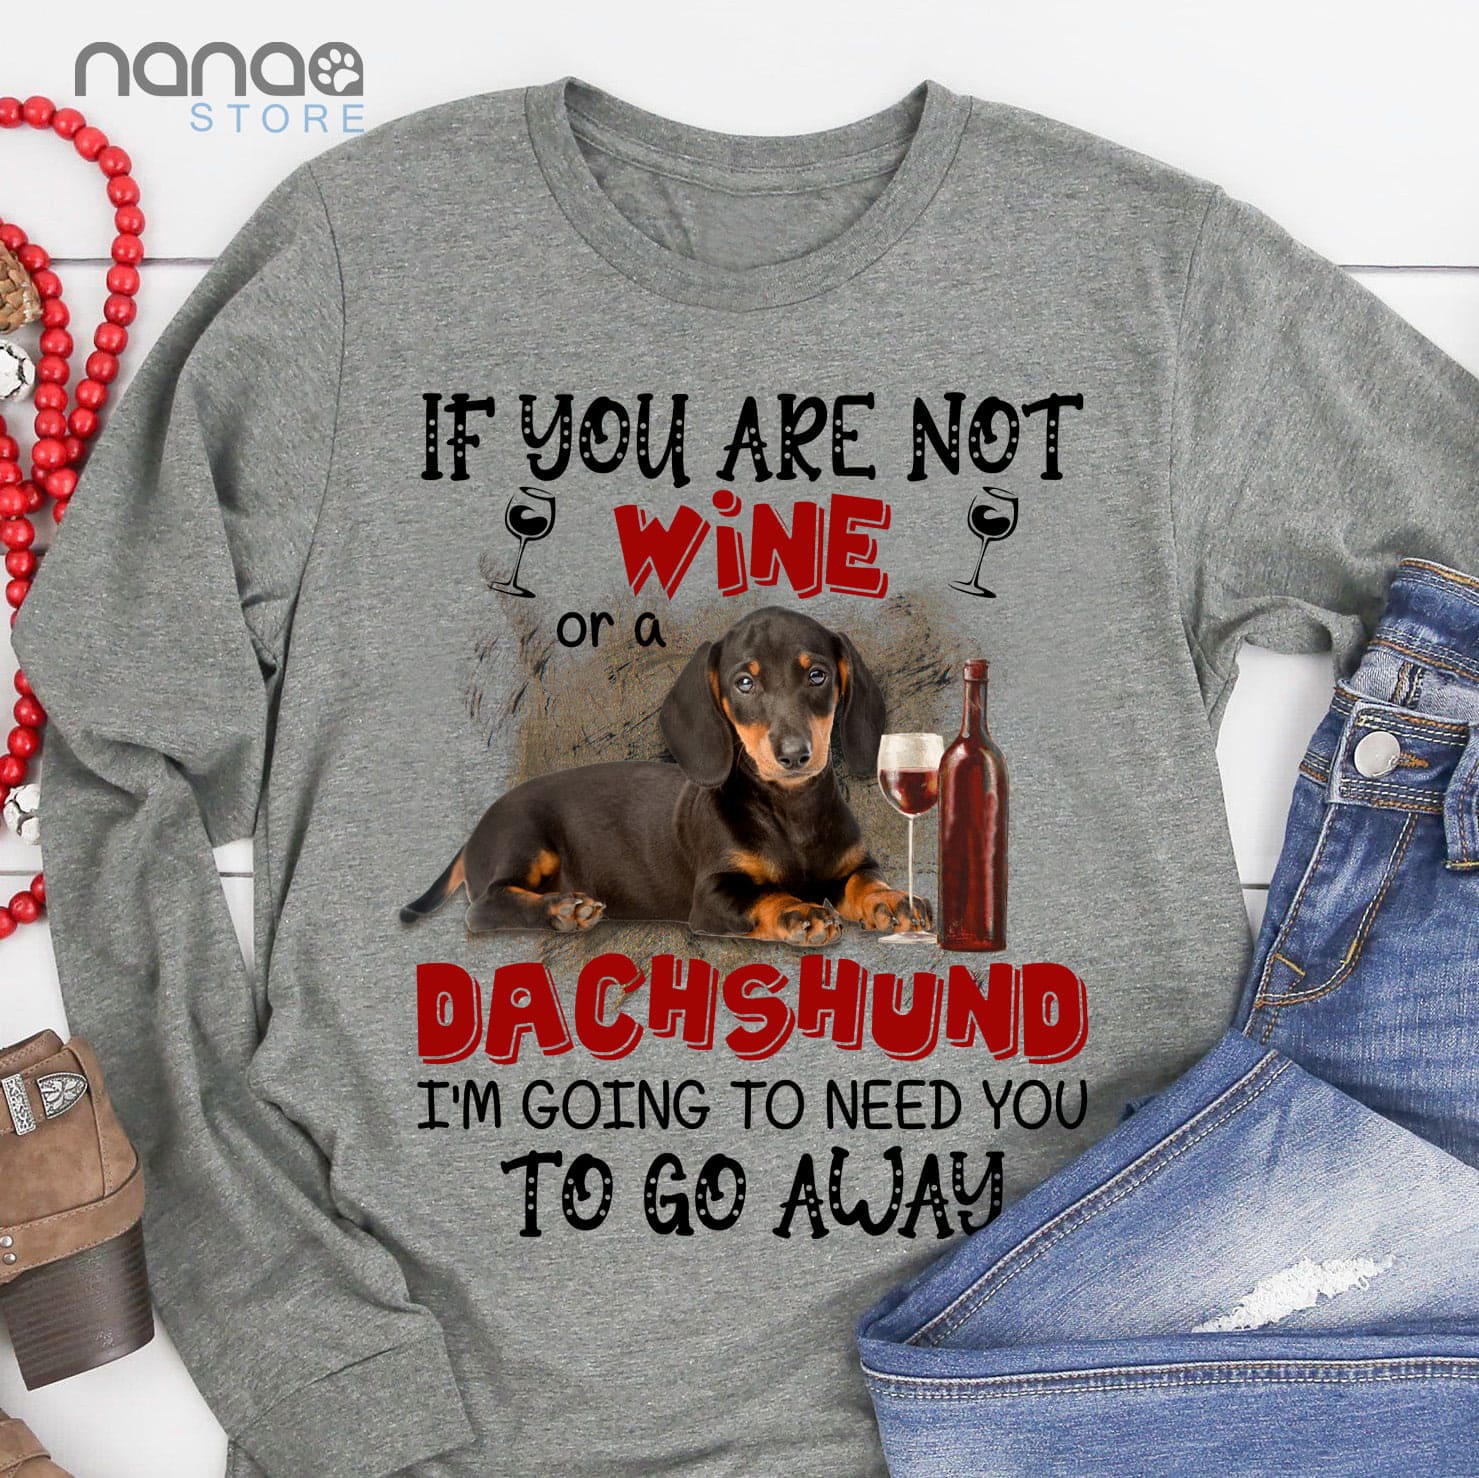 Dachshund Wine - If you are not wine or a dachshund i'm going to need you to go away